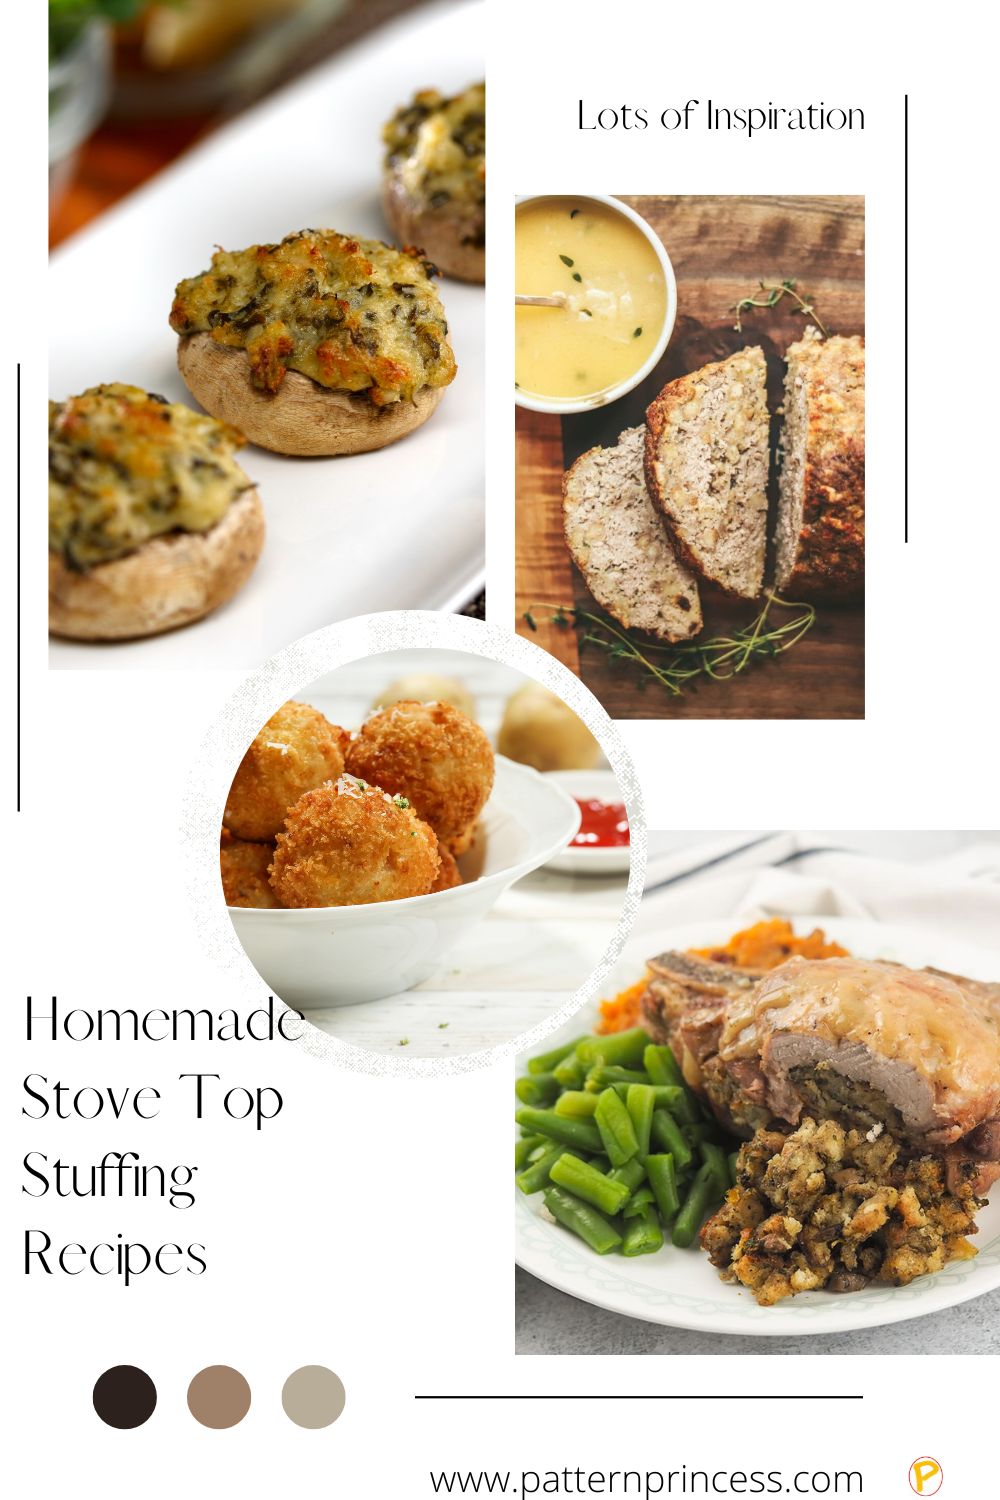 Homemade Stove Top Stuffing Recipes